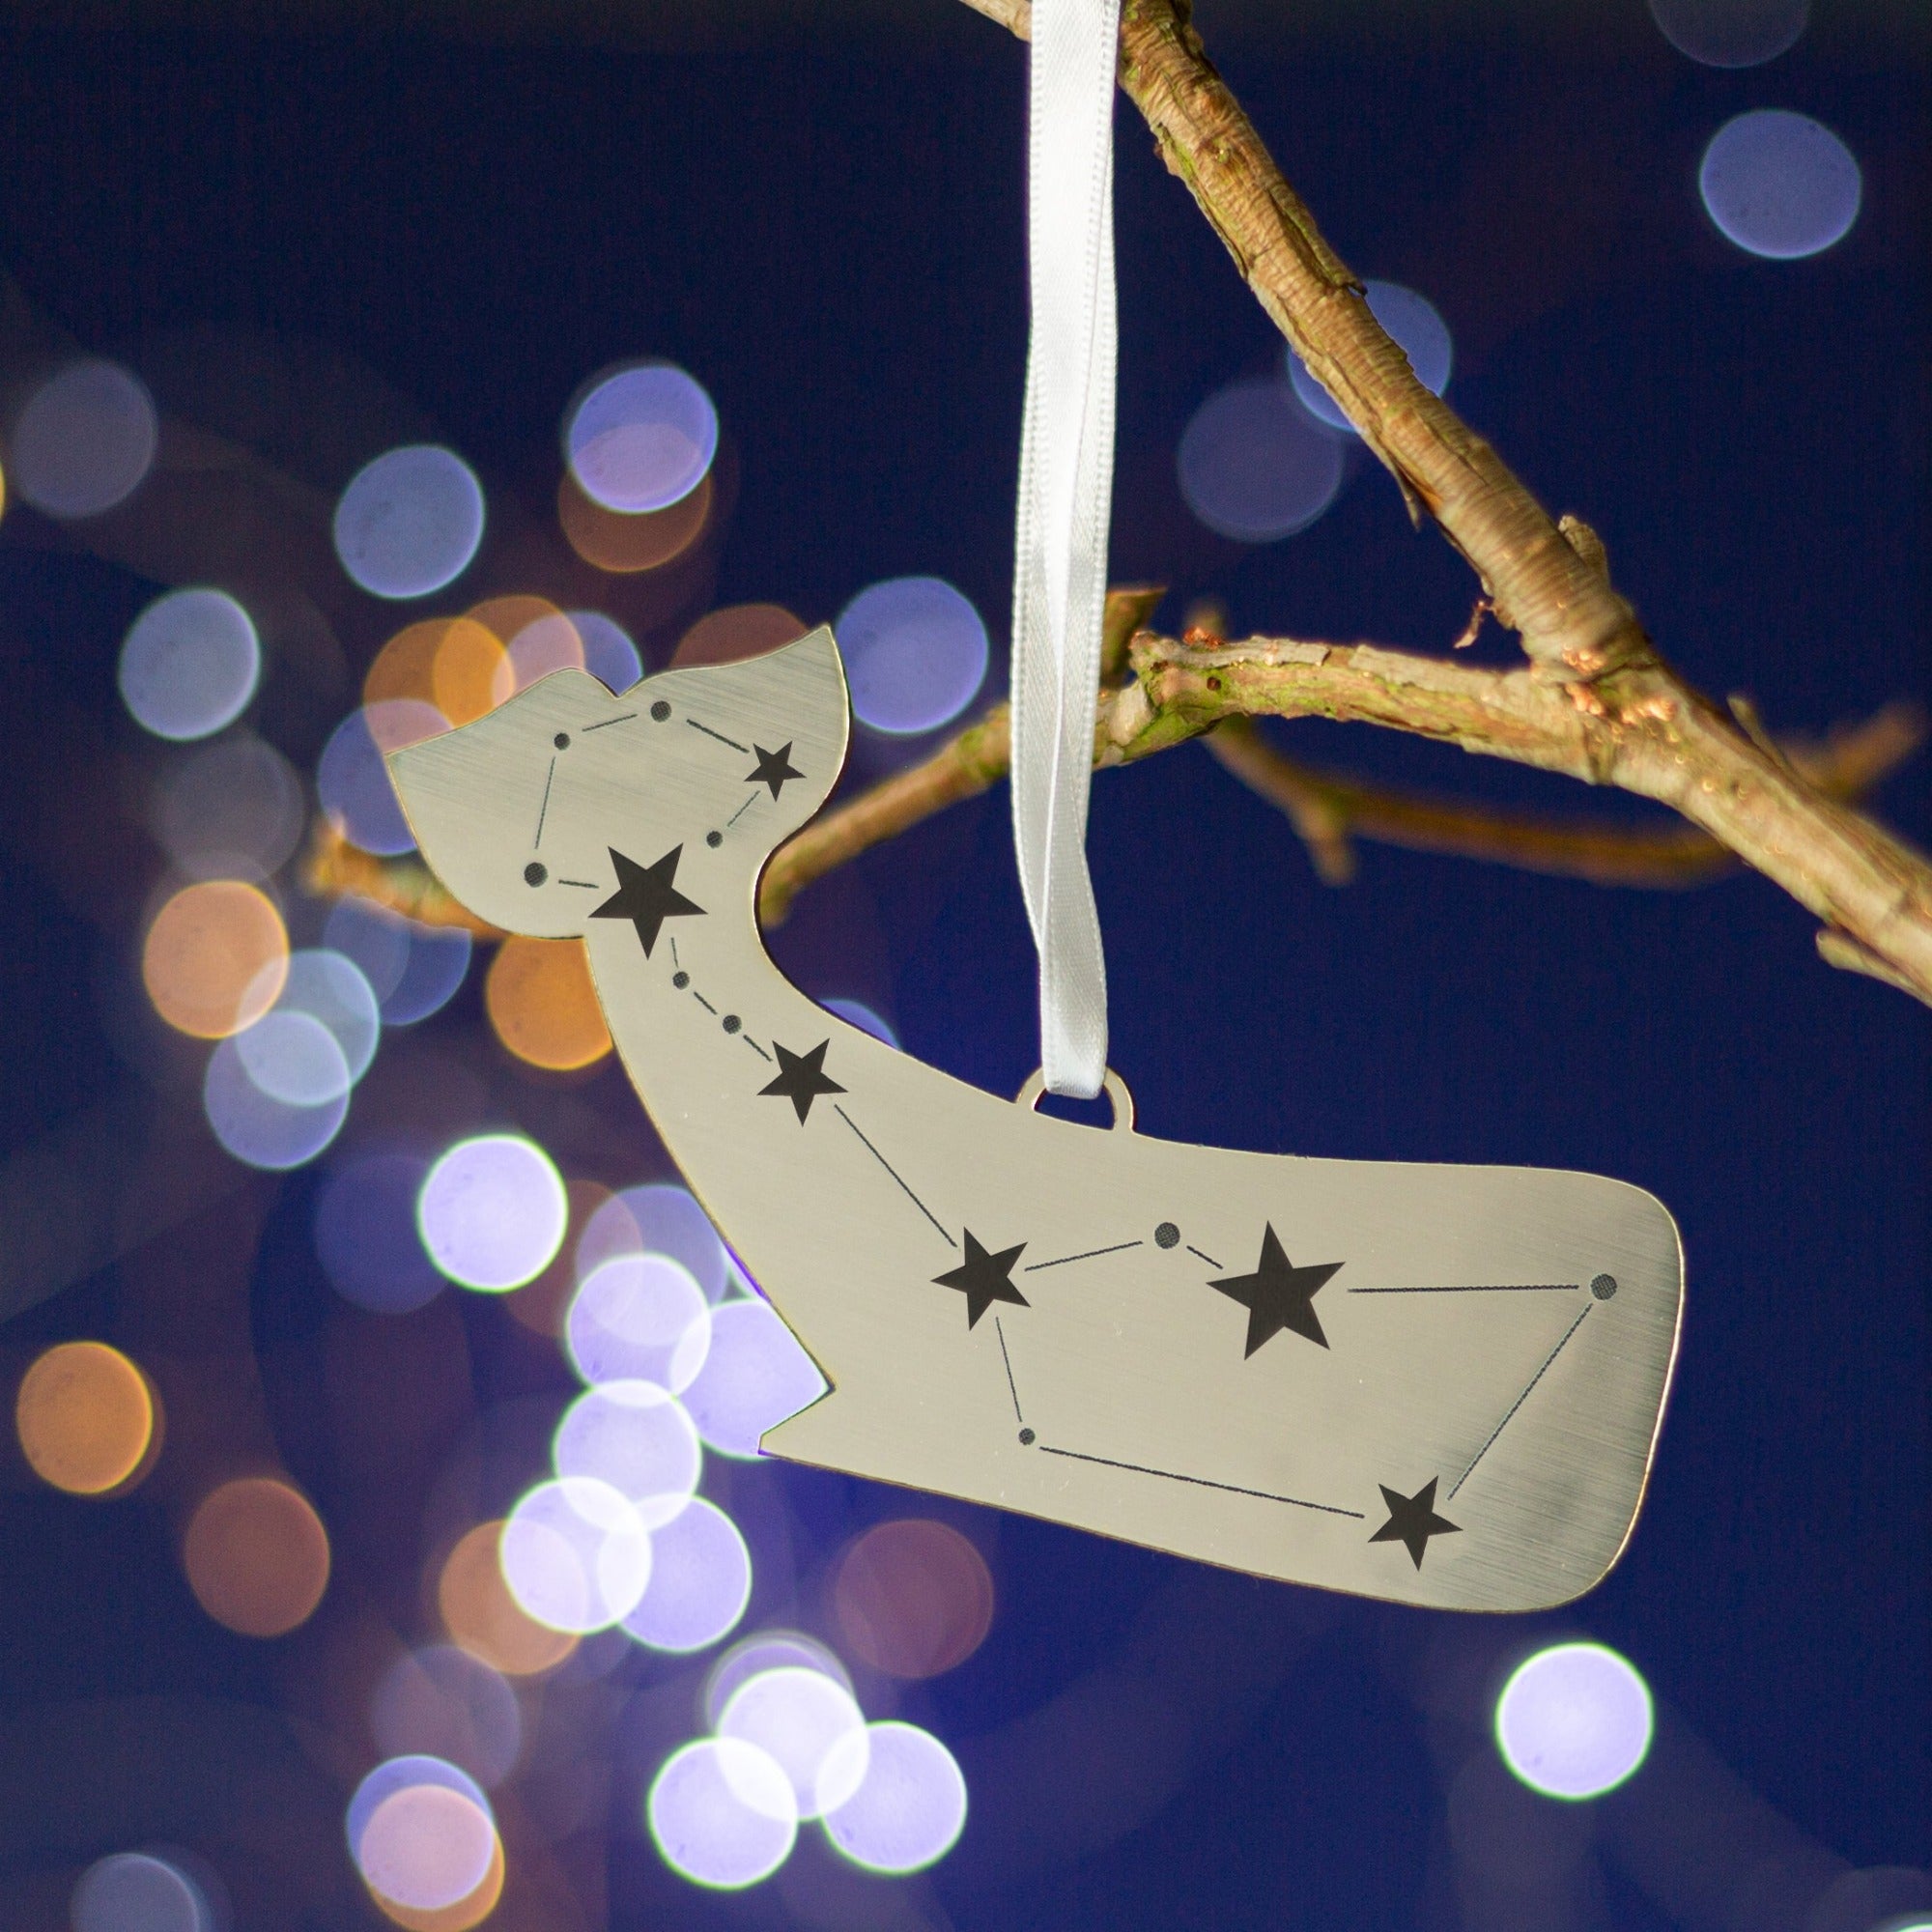 Copper metallic christmas tree decoration of a whale engraved with a constellation of stars